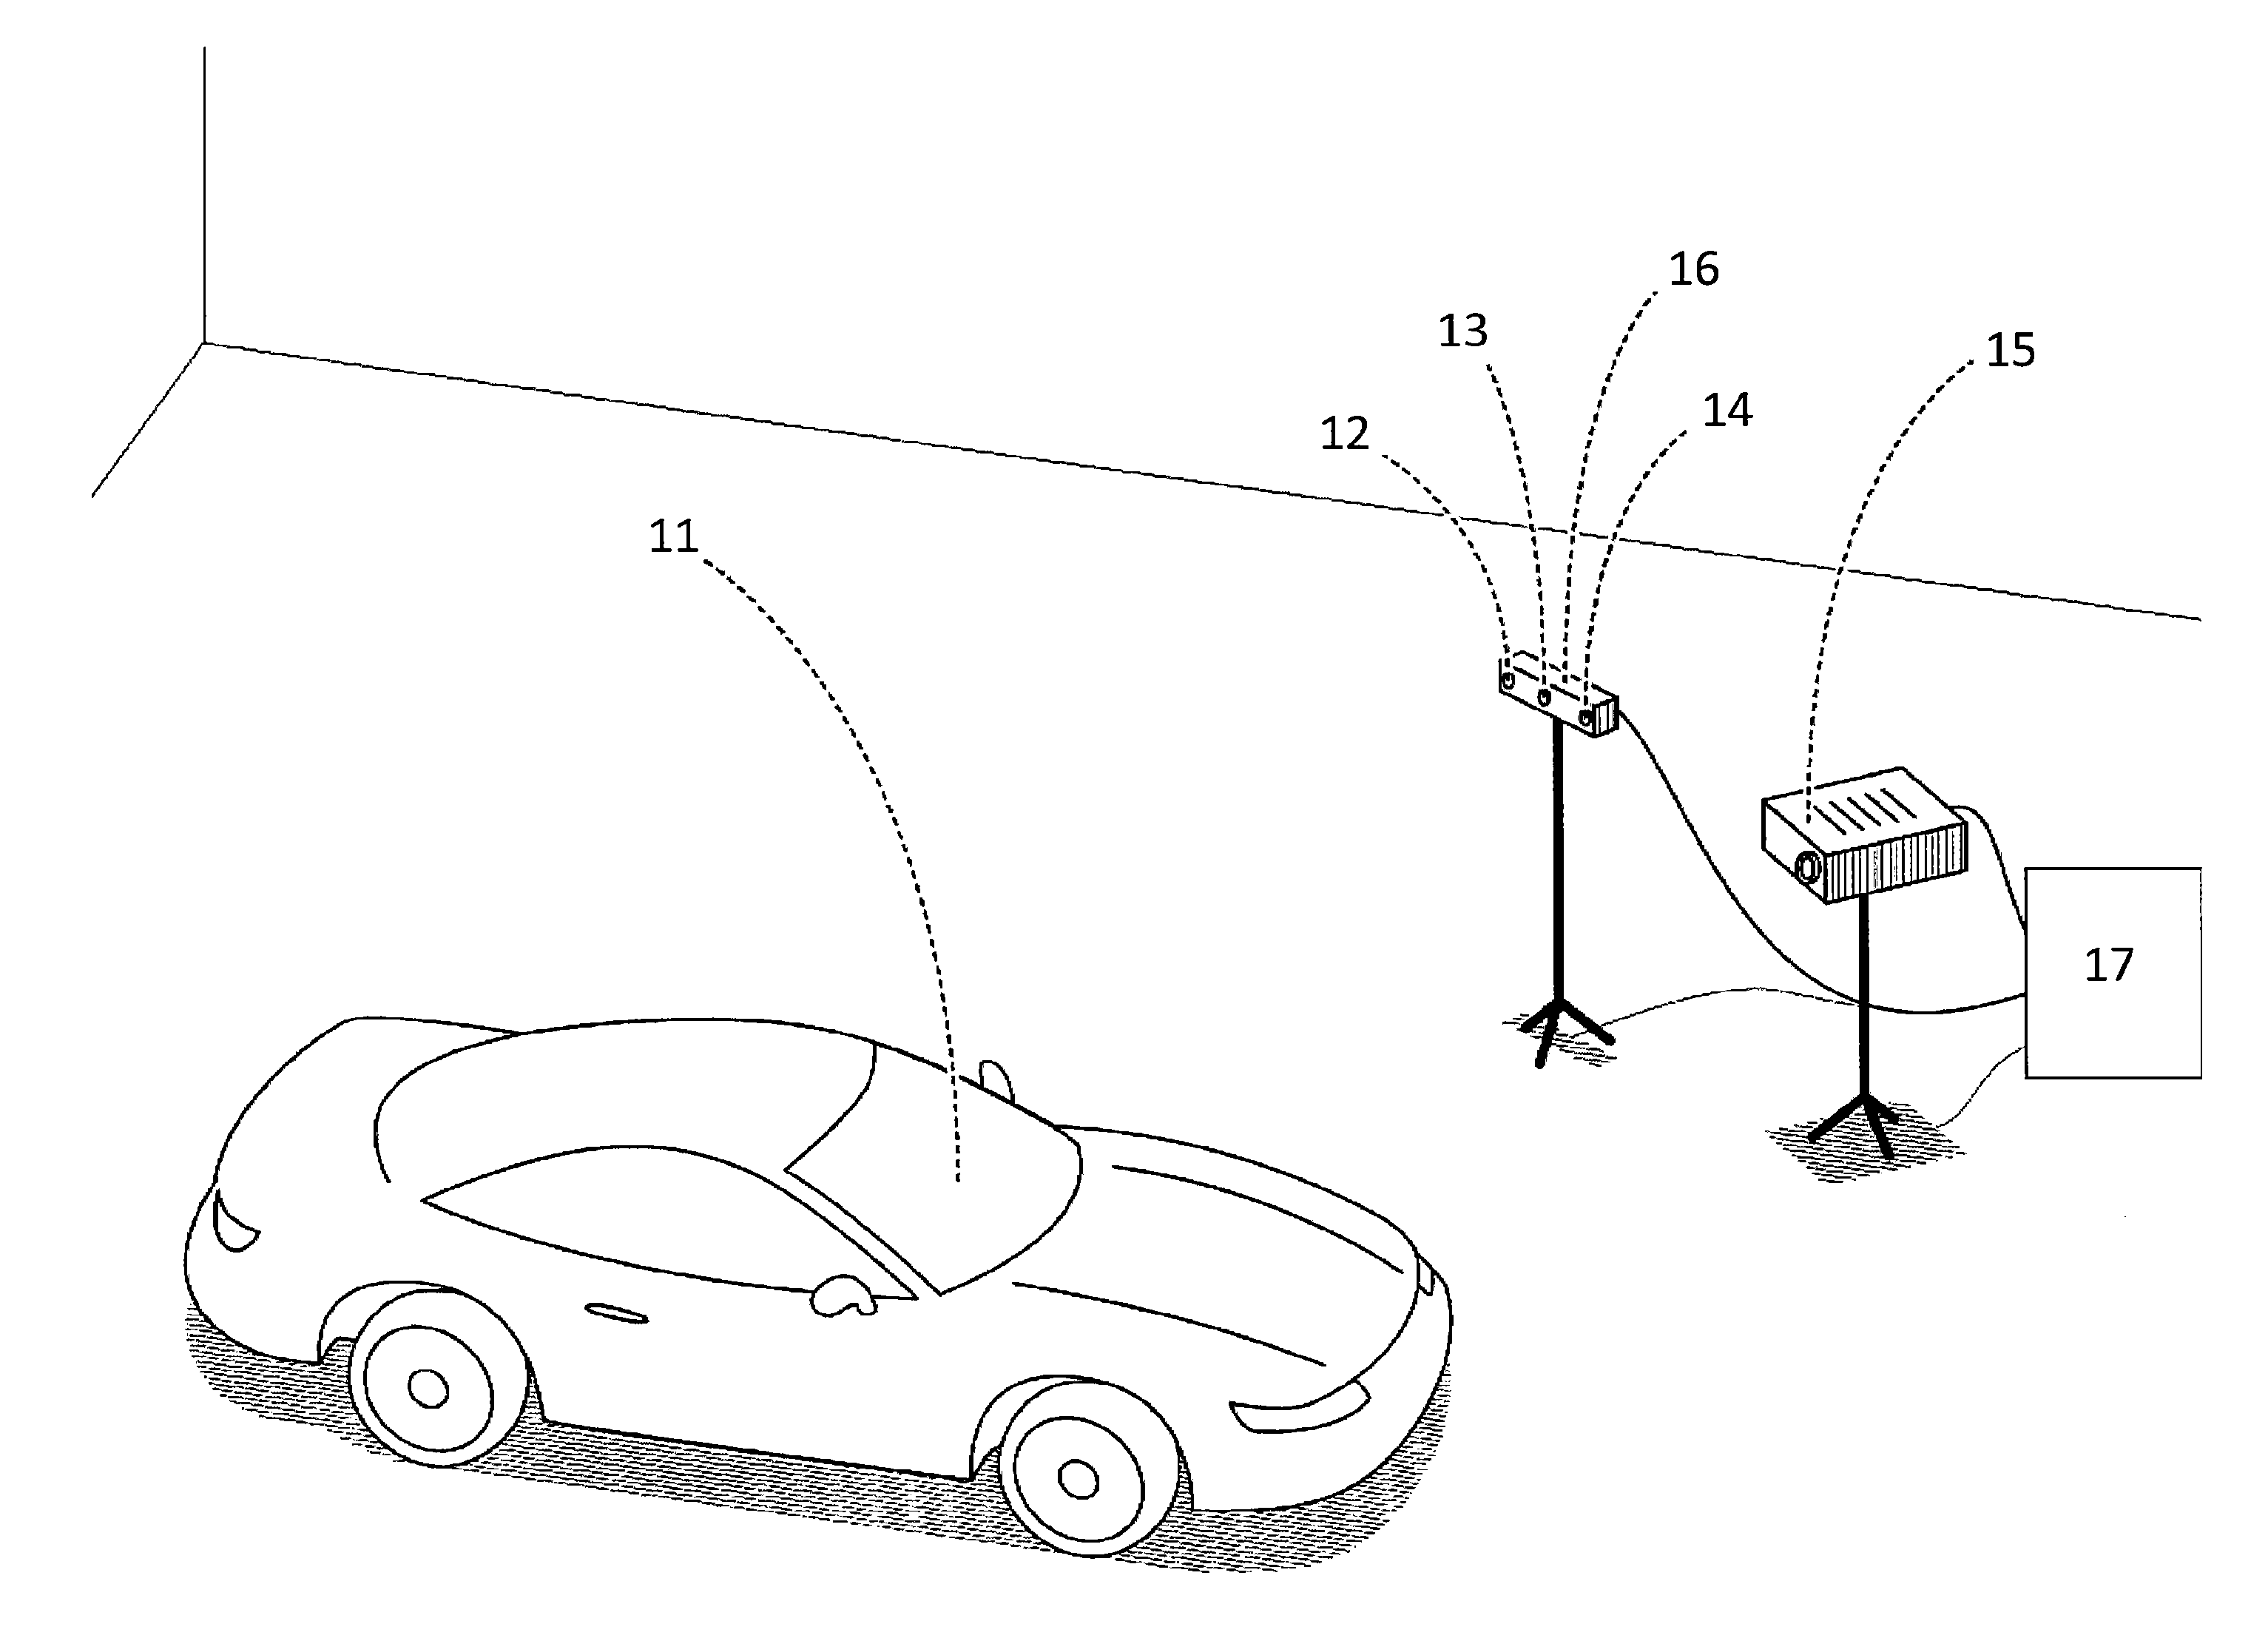 Method of and system for projecting digital information on a real object in a real environment